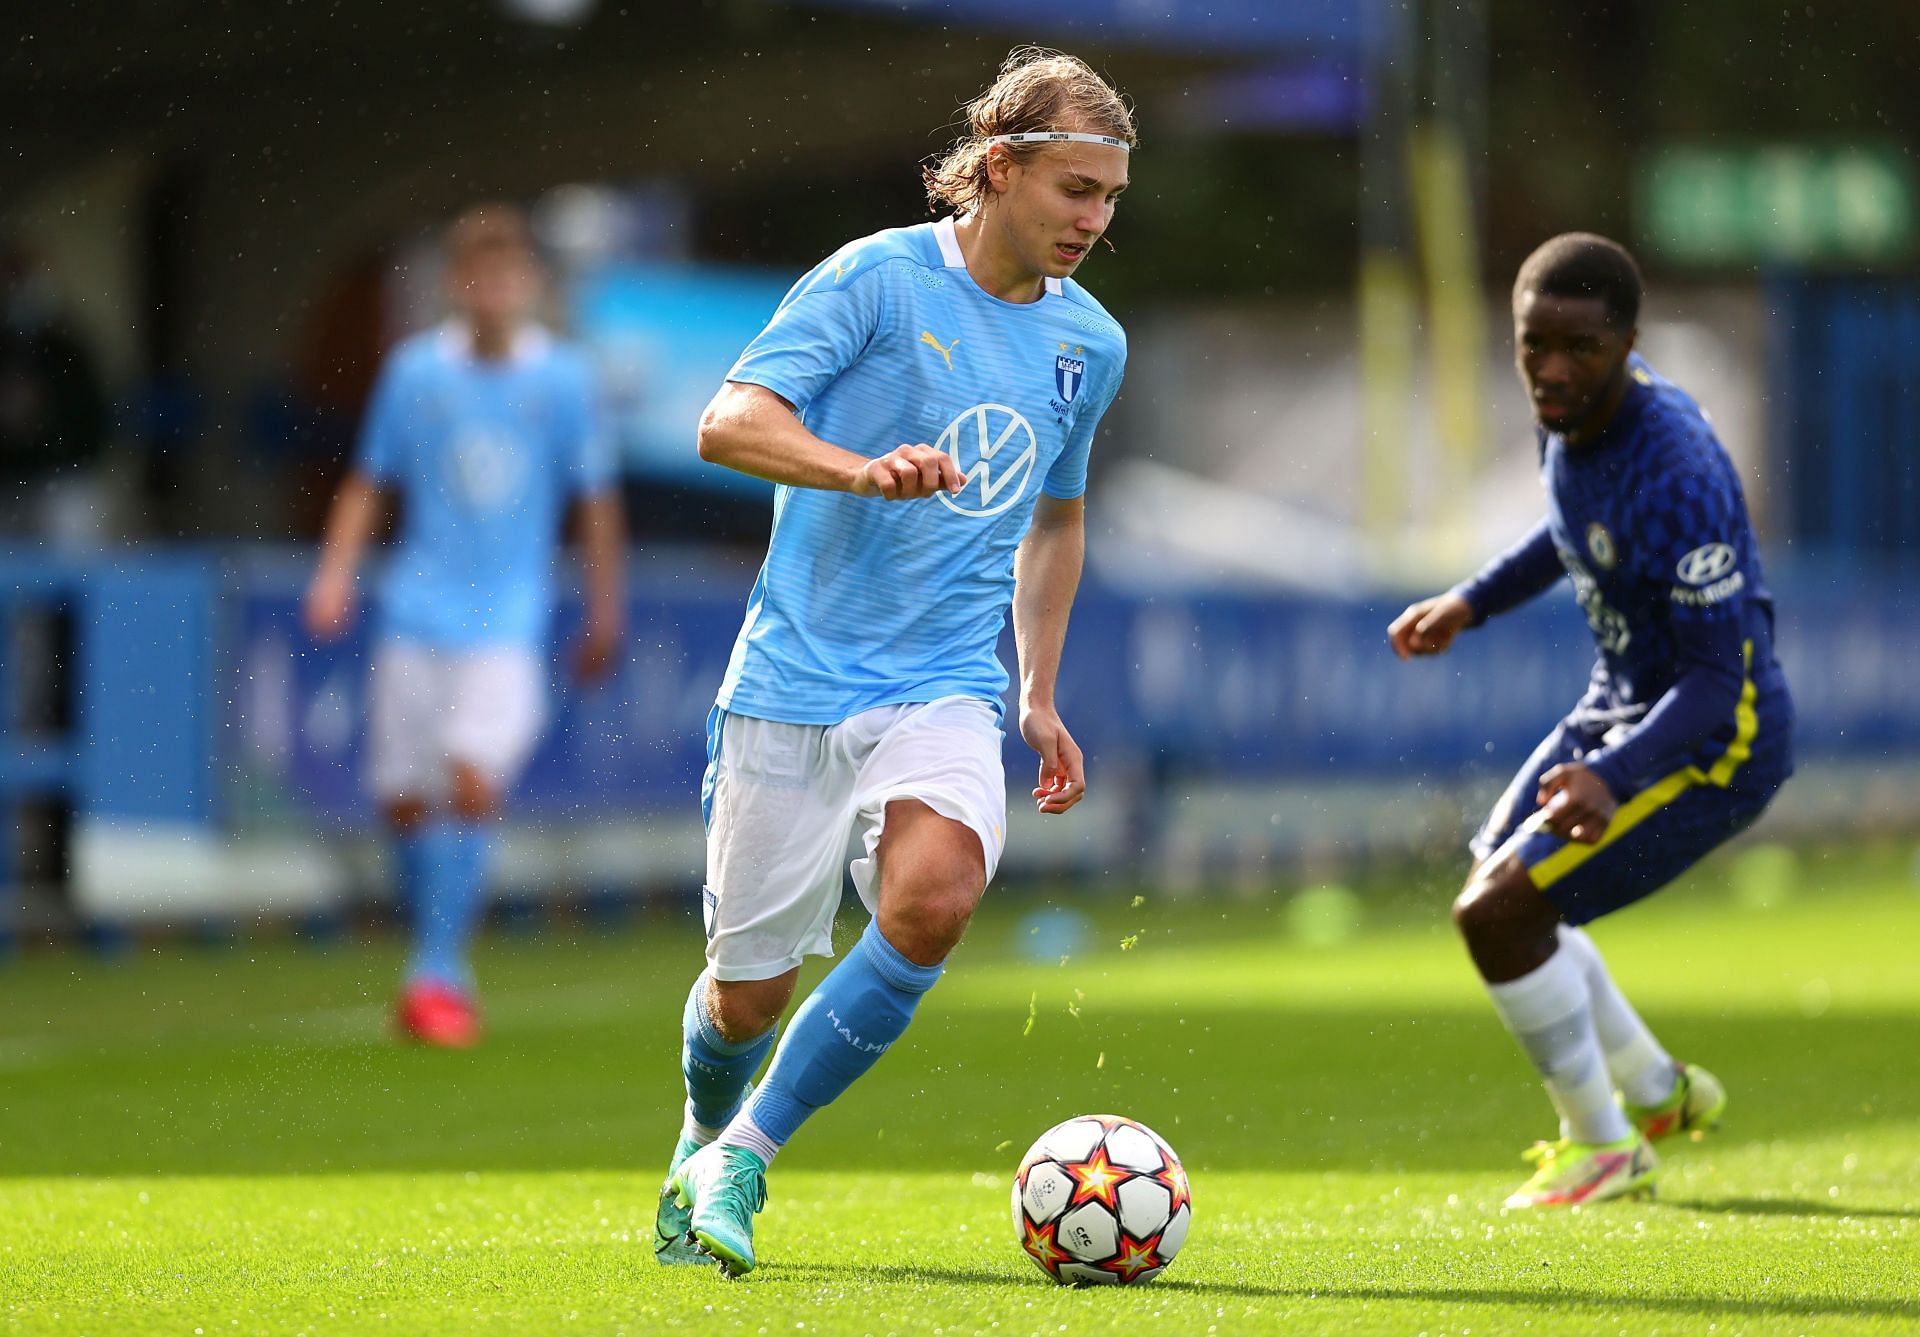 Malmo will face arch-rivals Helsingborgs in their upcoming Allsvenskan fixture on Monday